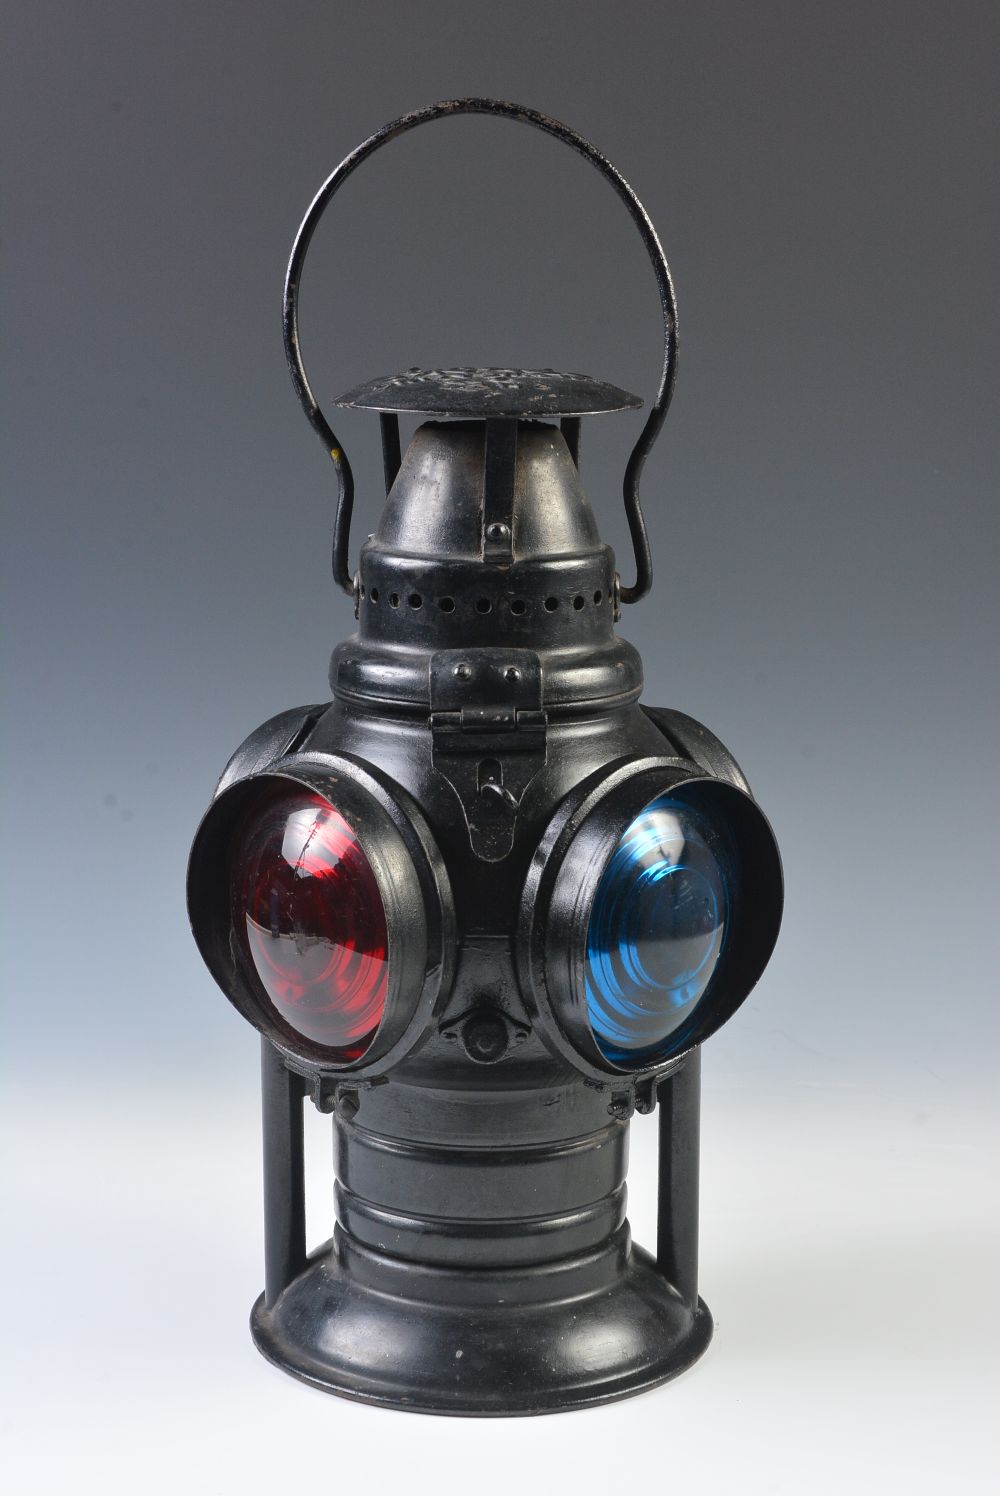 A NICE, CLEAN ADLAKE FORK MOUNT BELLBOTTOM SWITCH LAMP